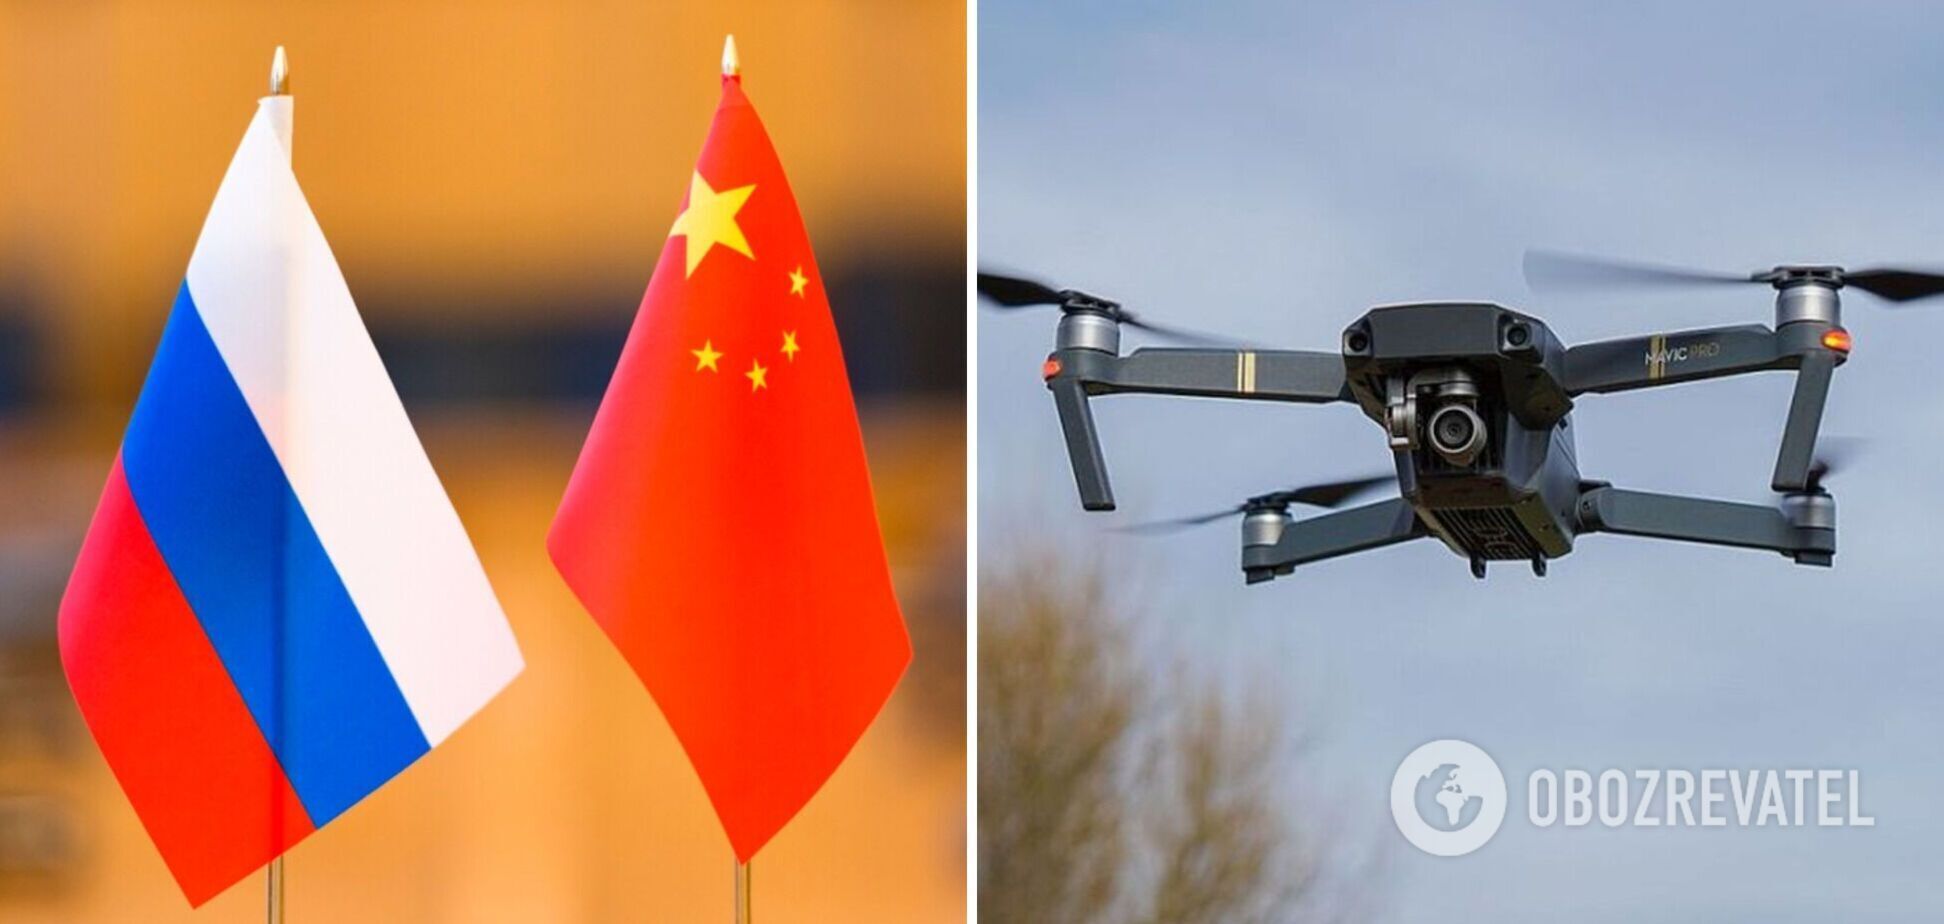 China cuts off supply of drones to Russia, shortage of components begins - media